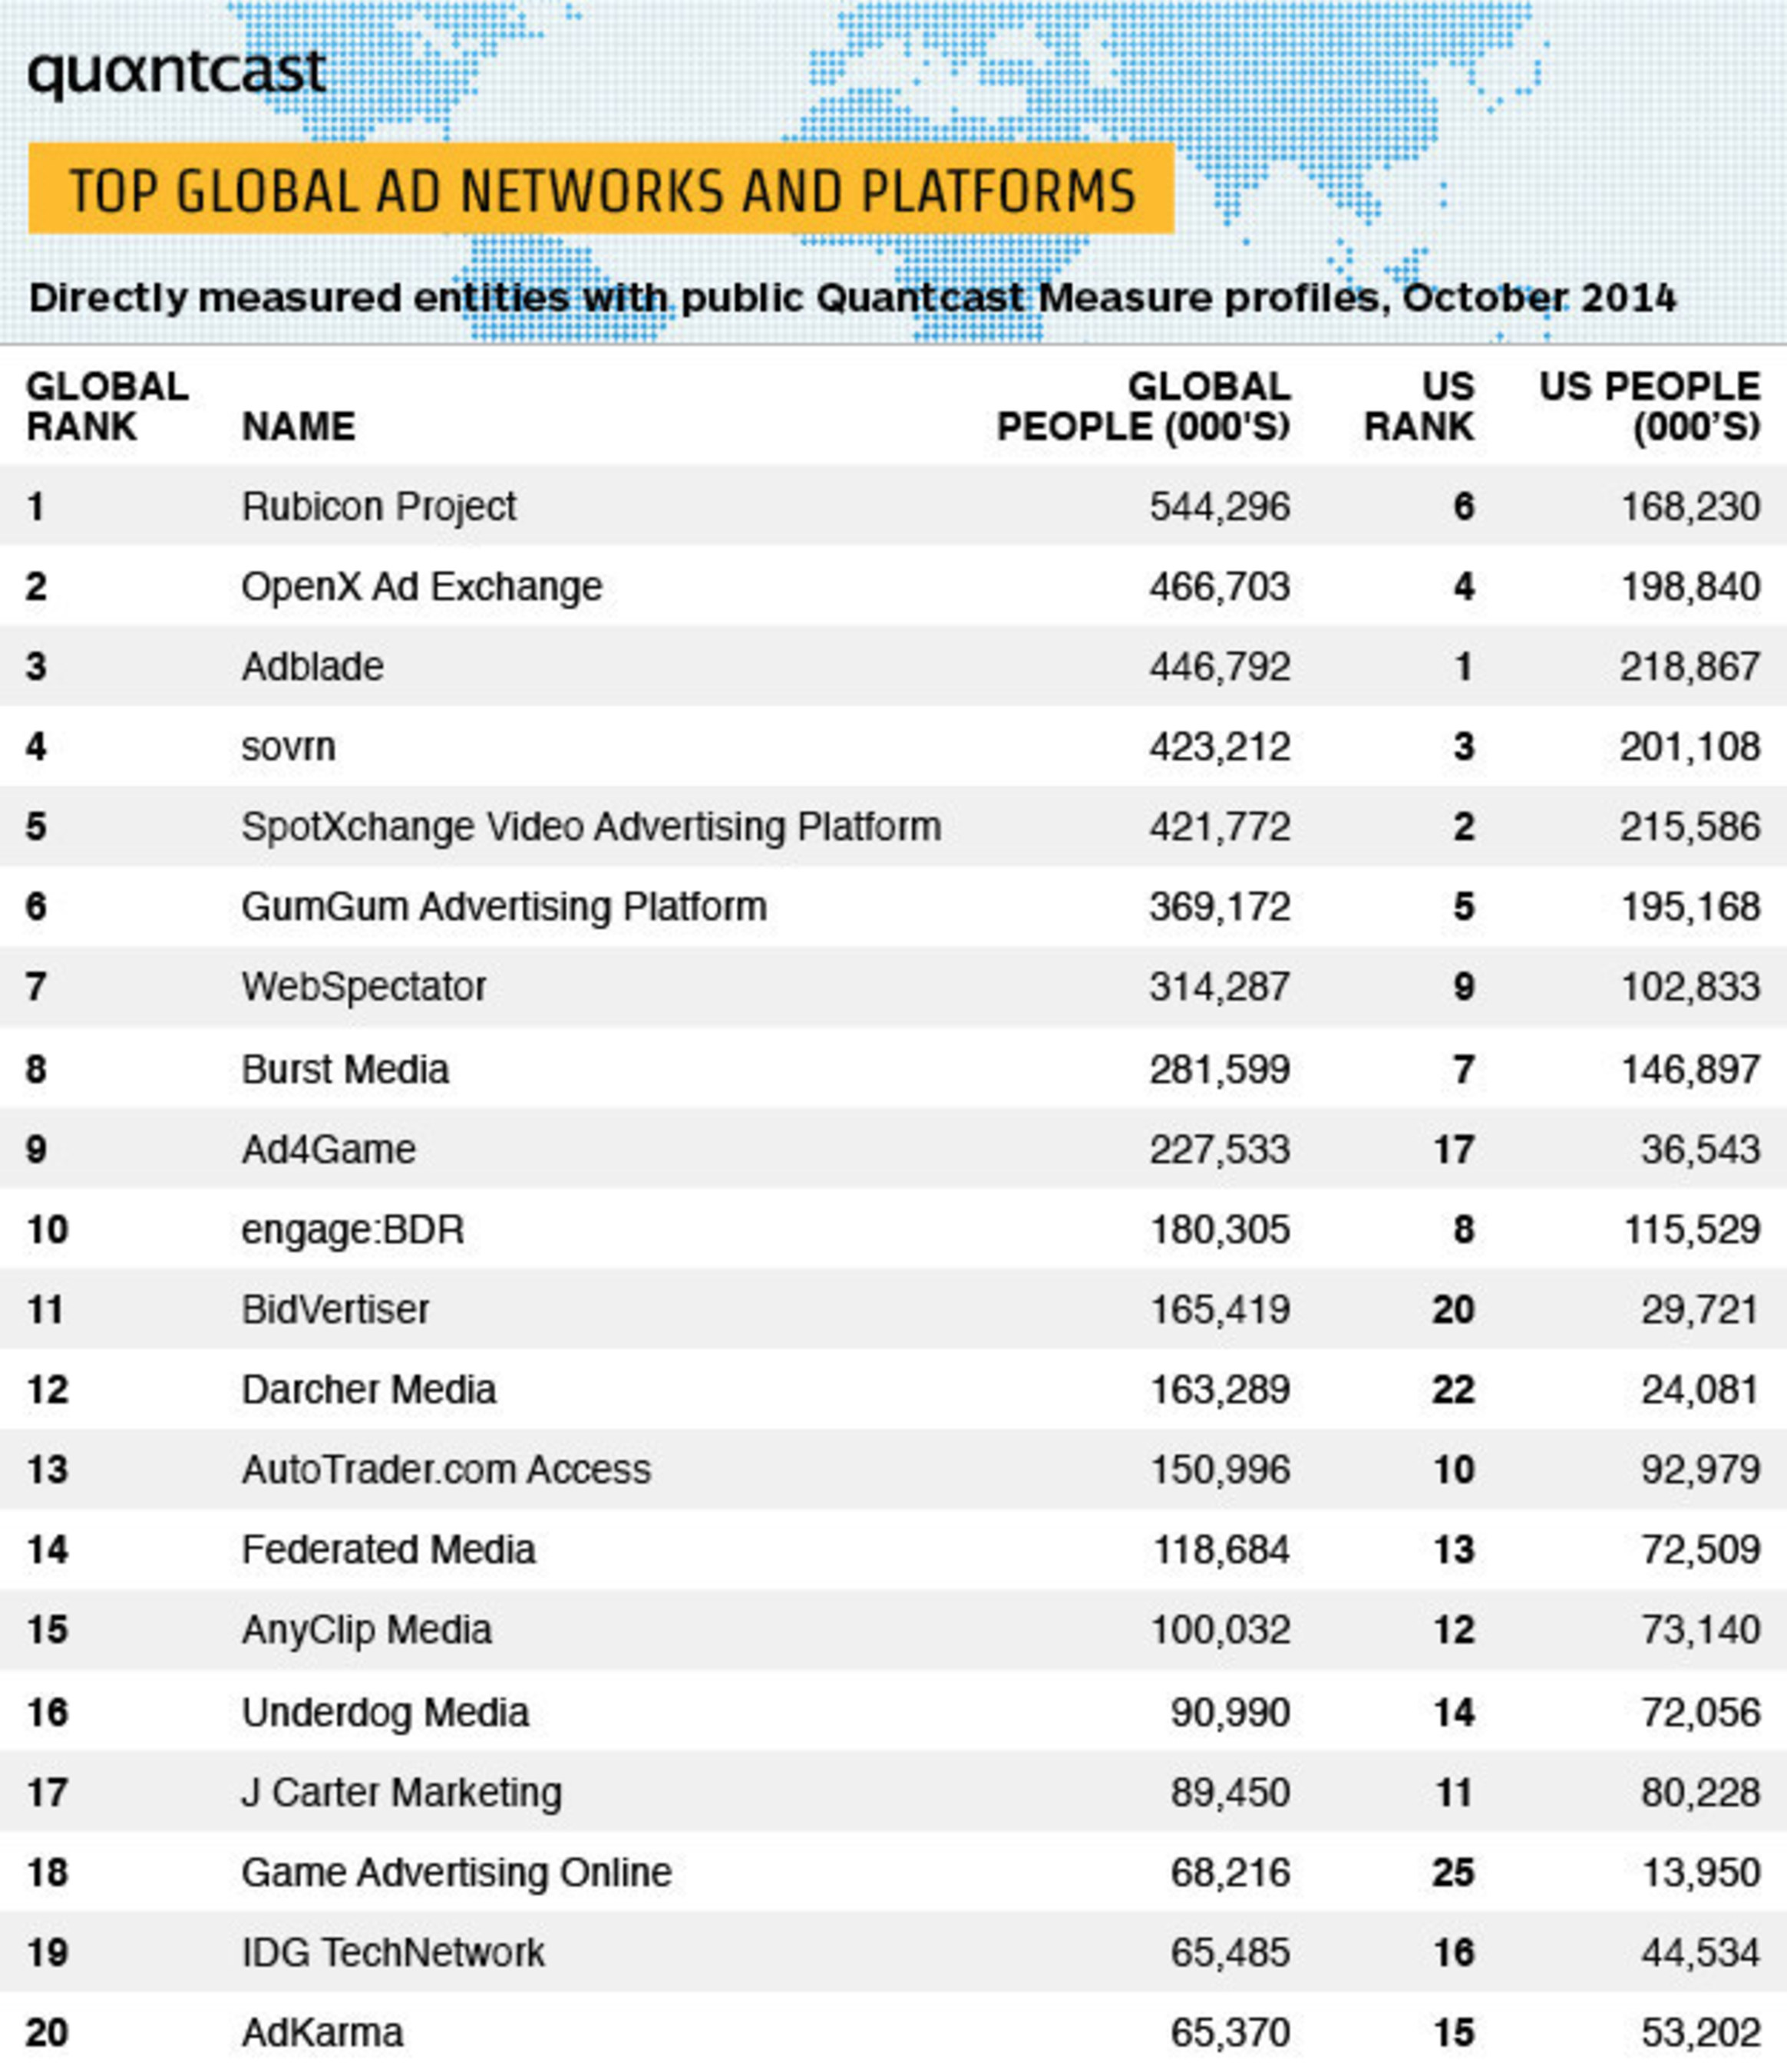 Quantcast Top Global Ad Networks and Platforms List